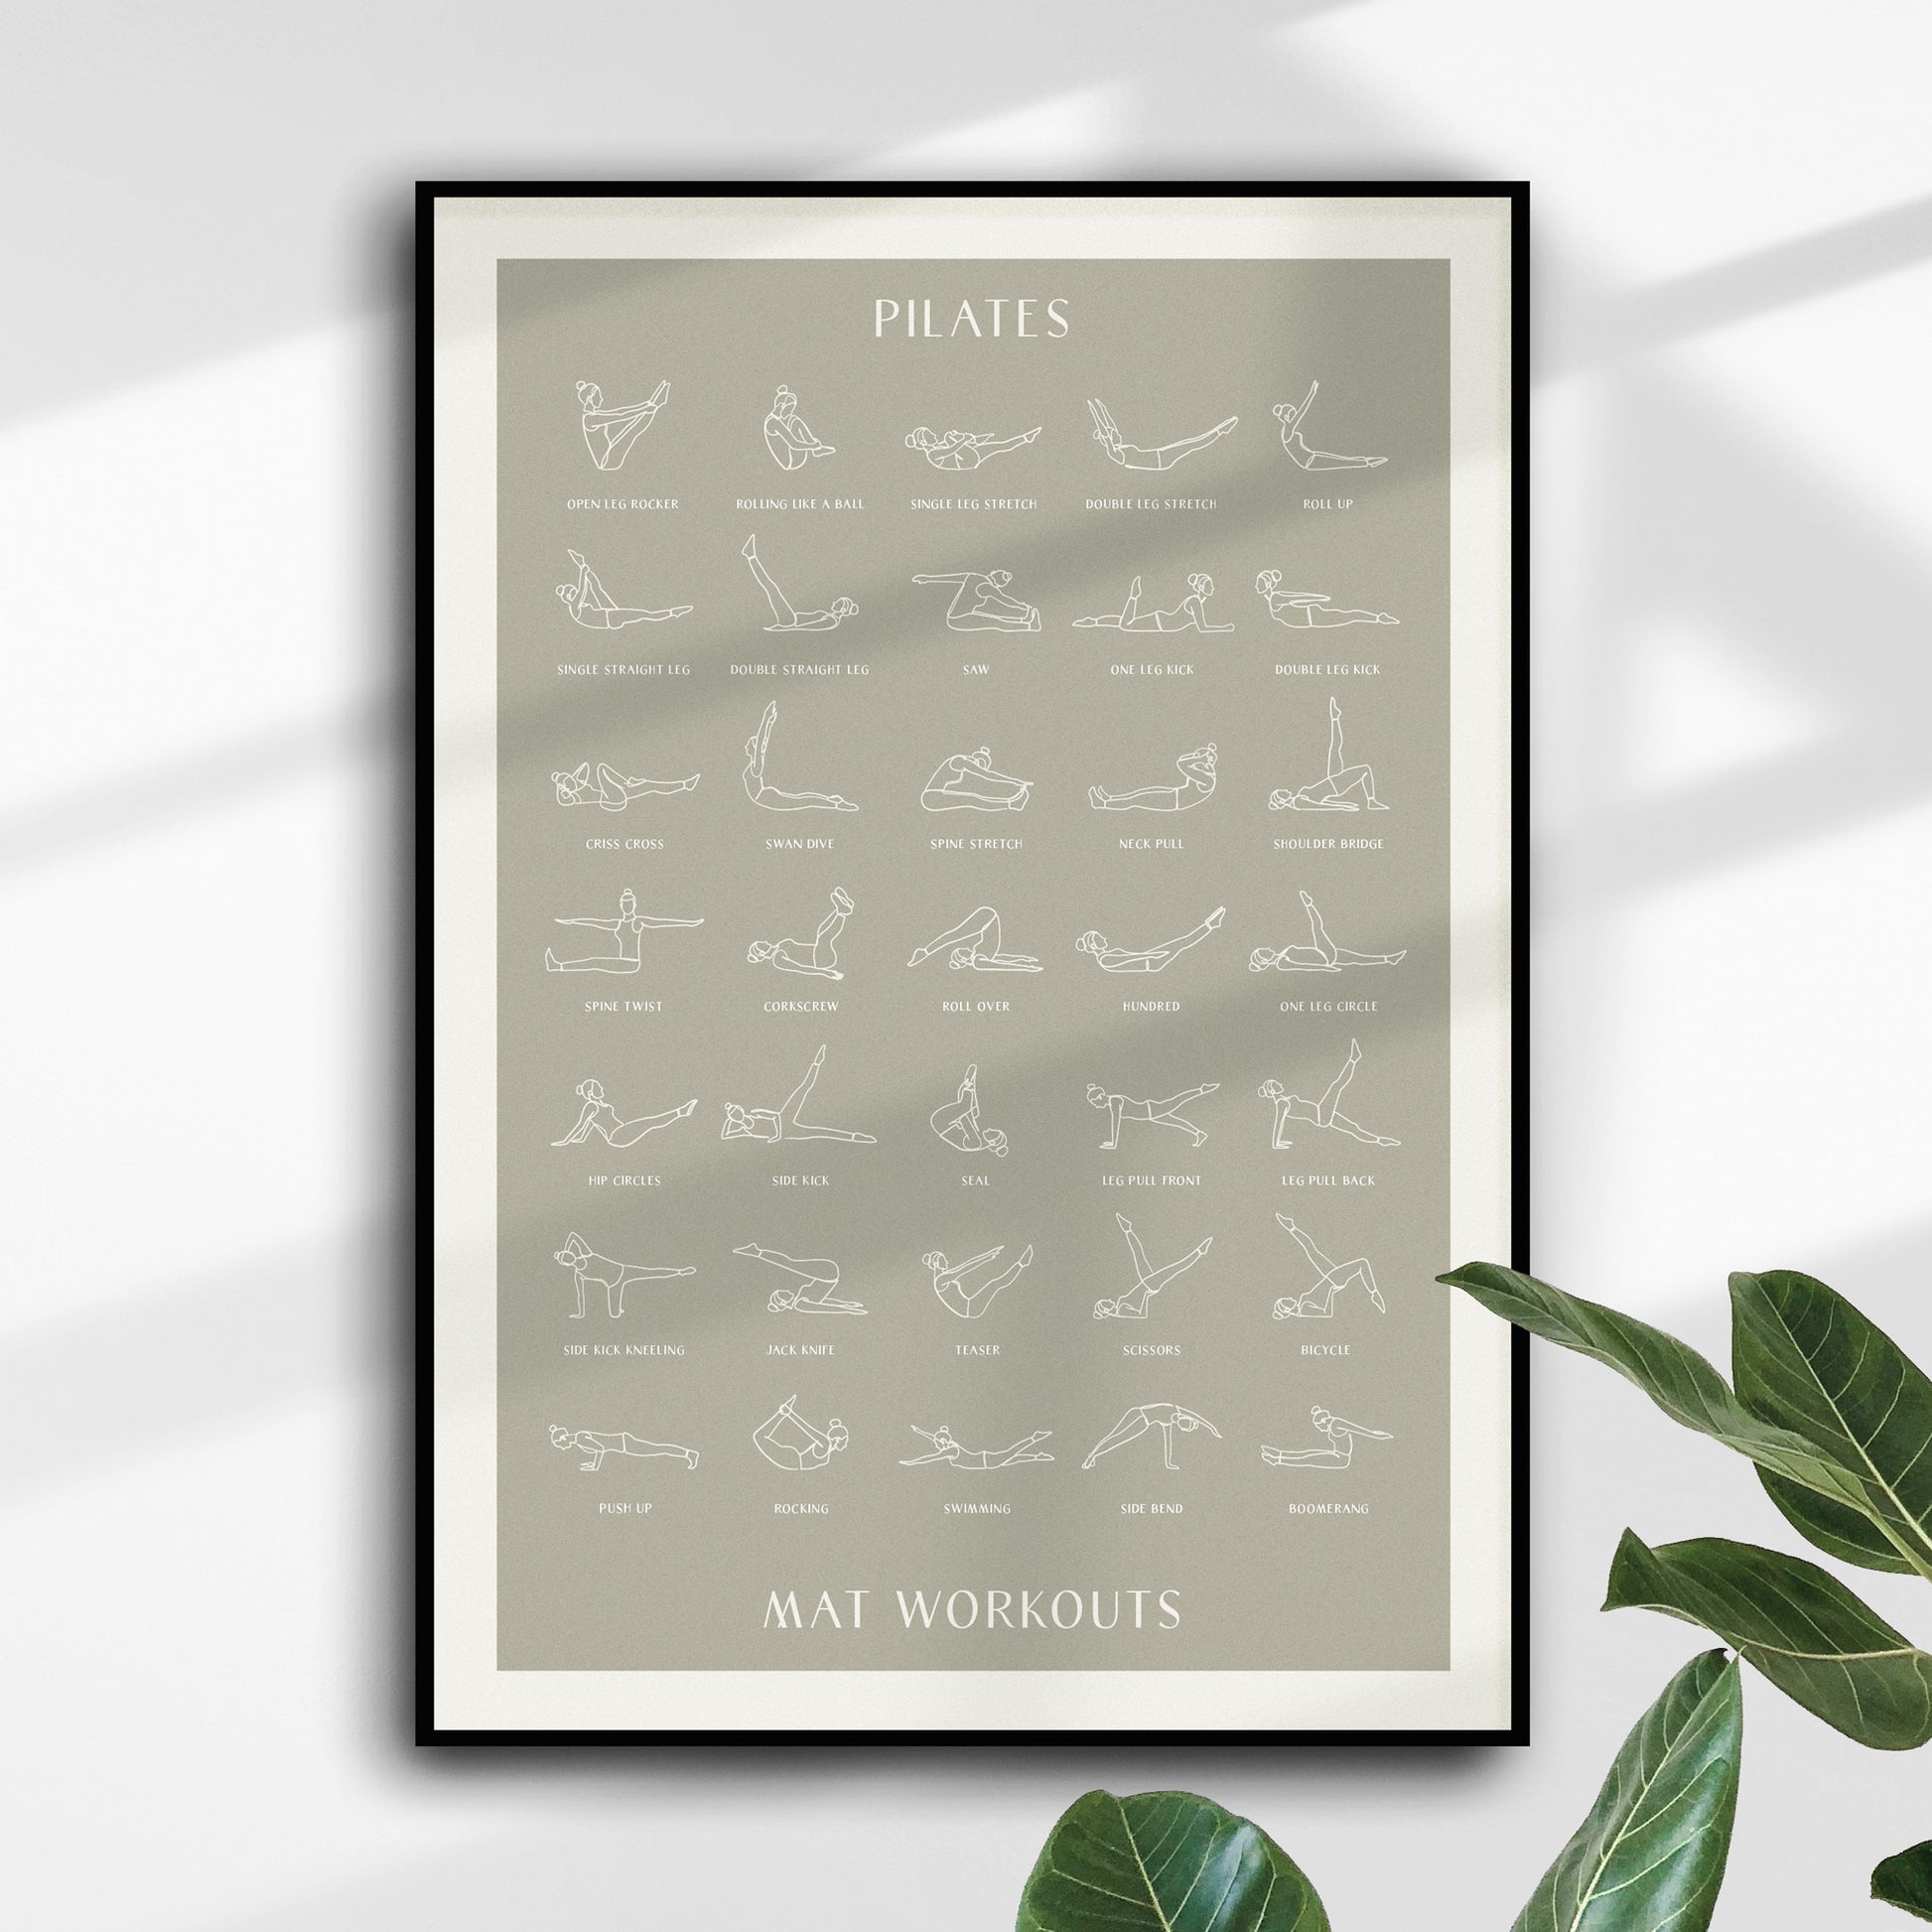 Pilates Mat Workout poster print sage olive green hanging on wall with shadows casting across the wall